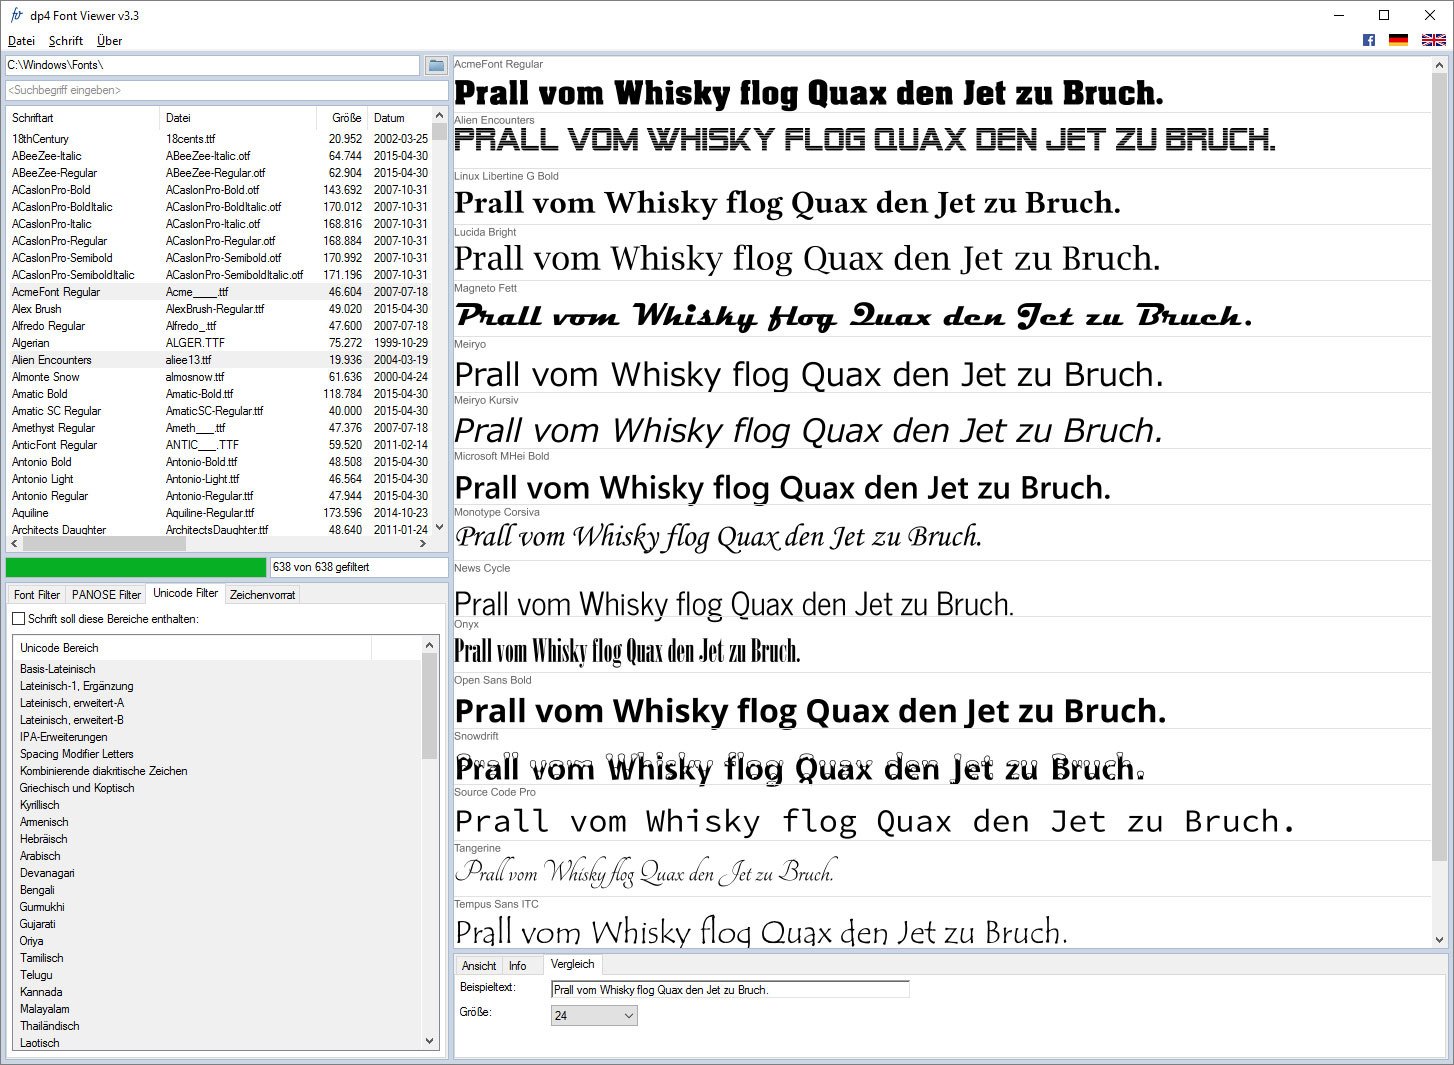 font viewer of my text